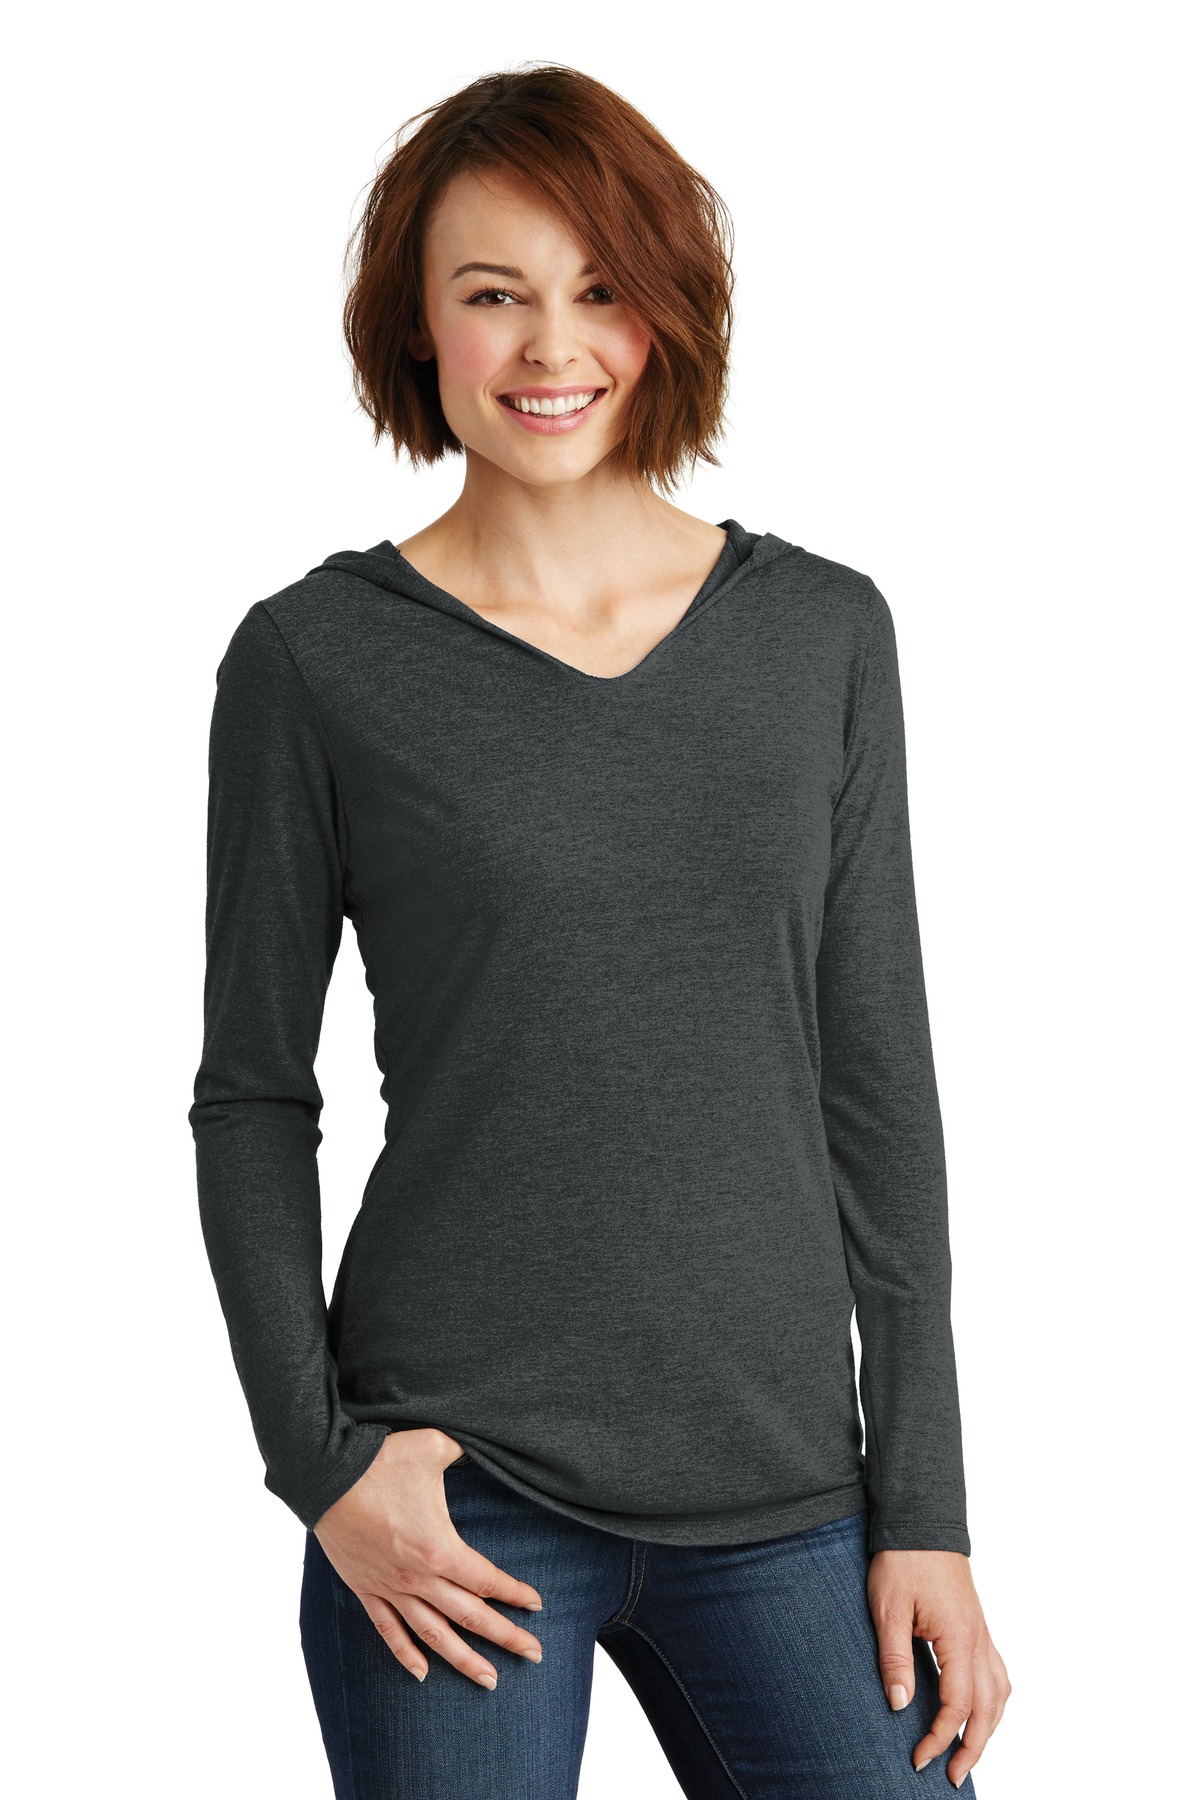 District Ladies Hospitality T-Shirts ® Womens Perfect Tri® Long Sleeve Hoodie.-District